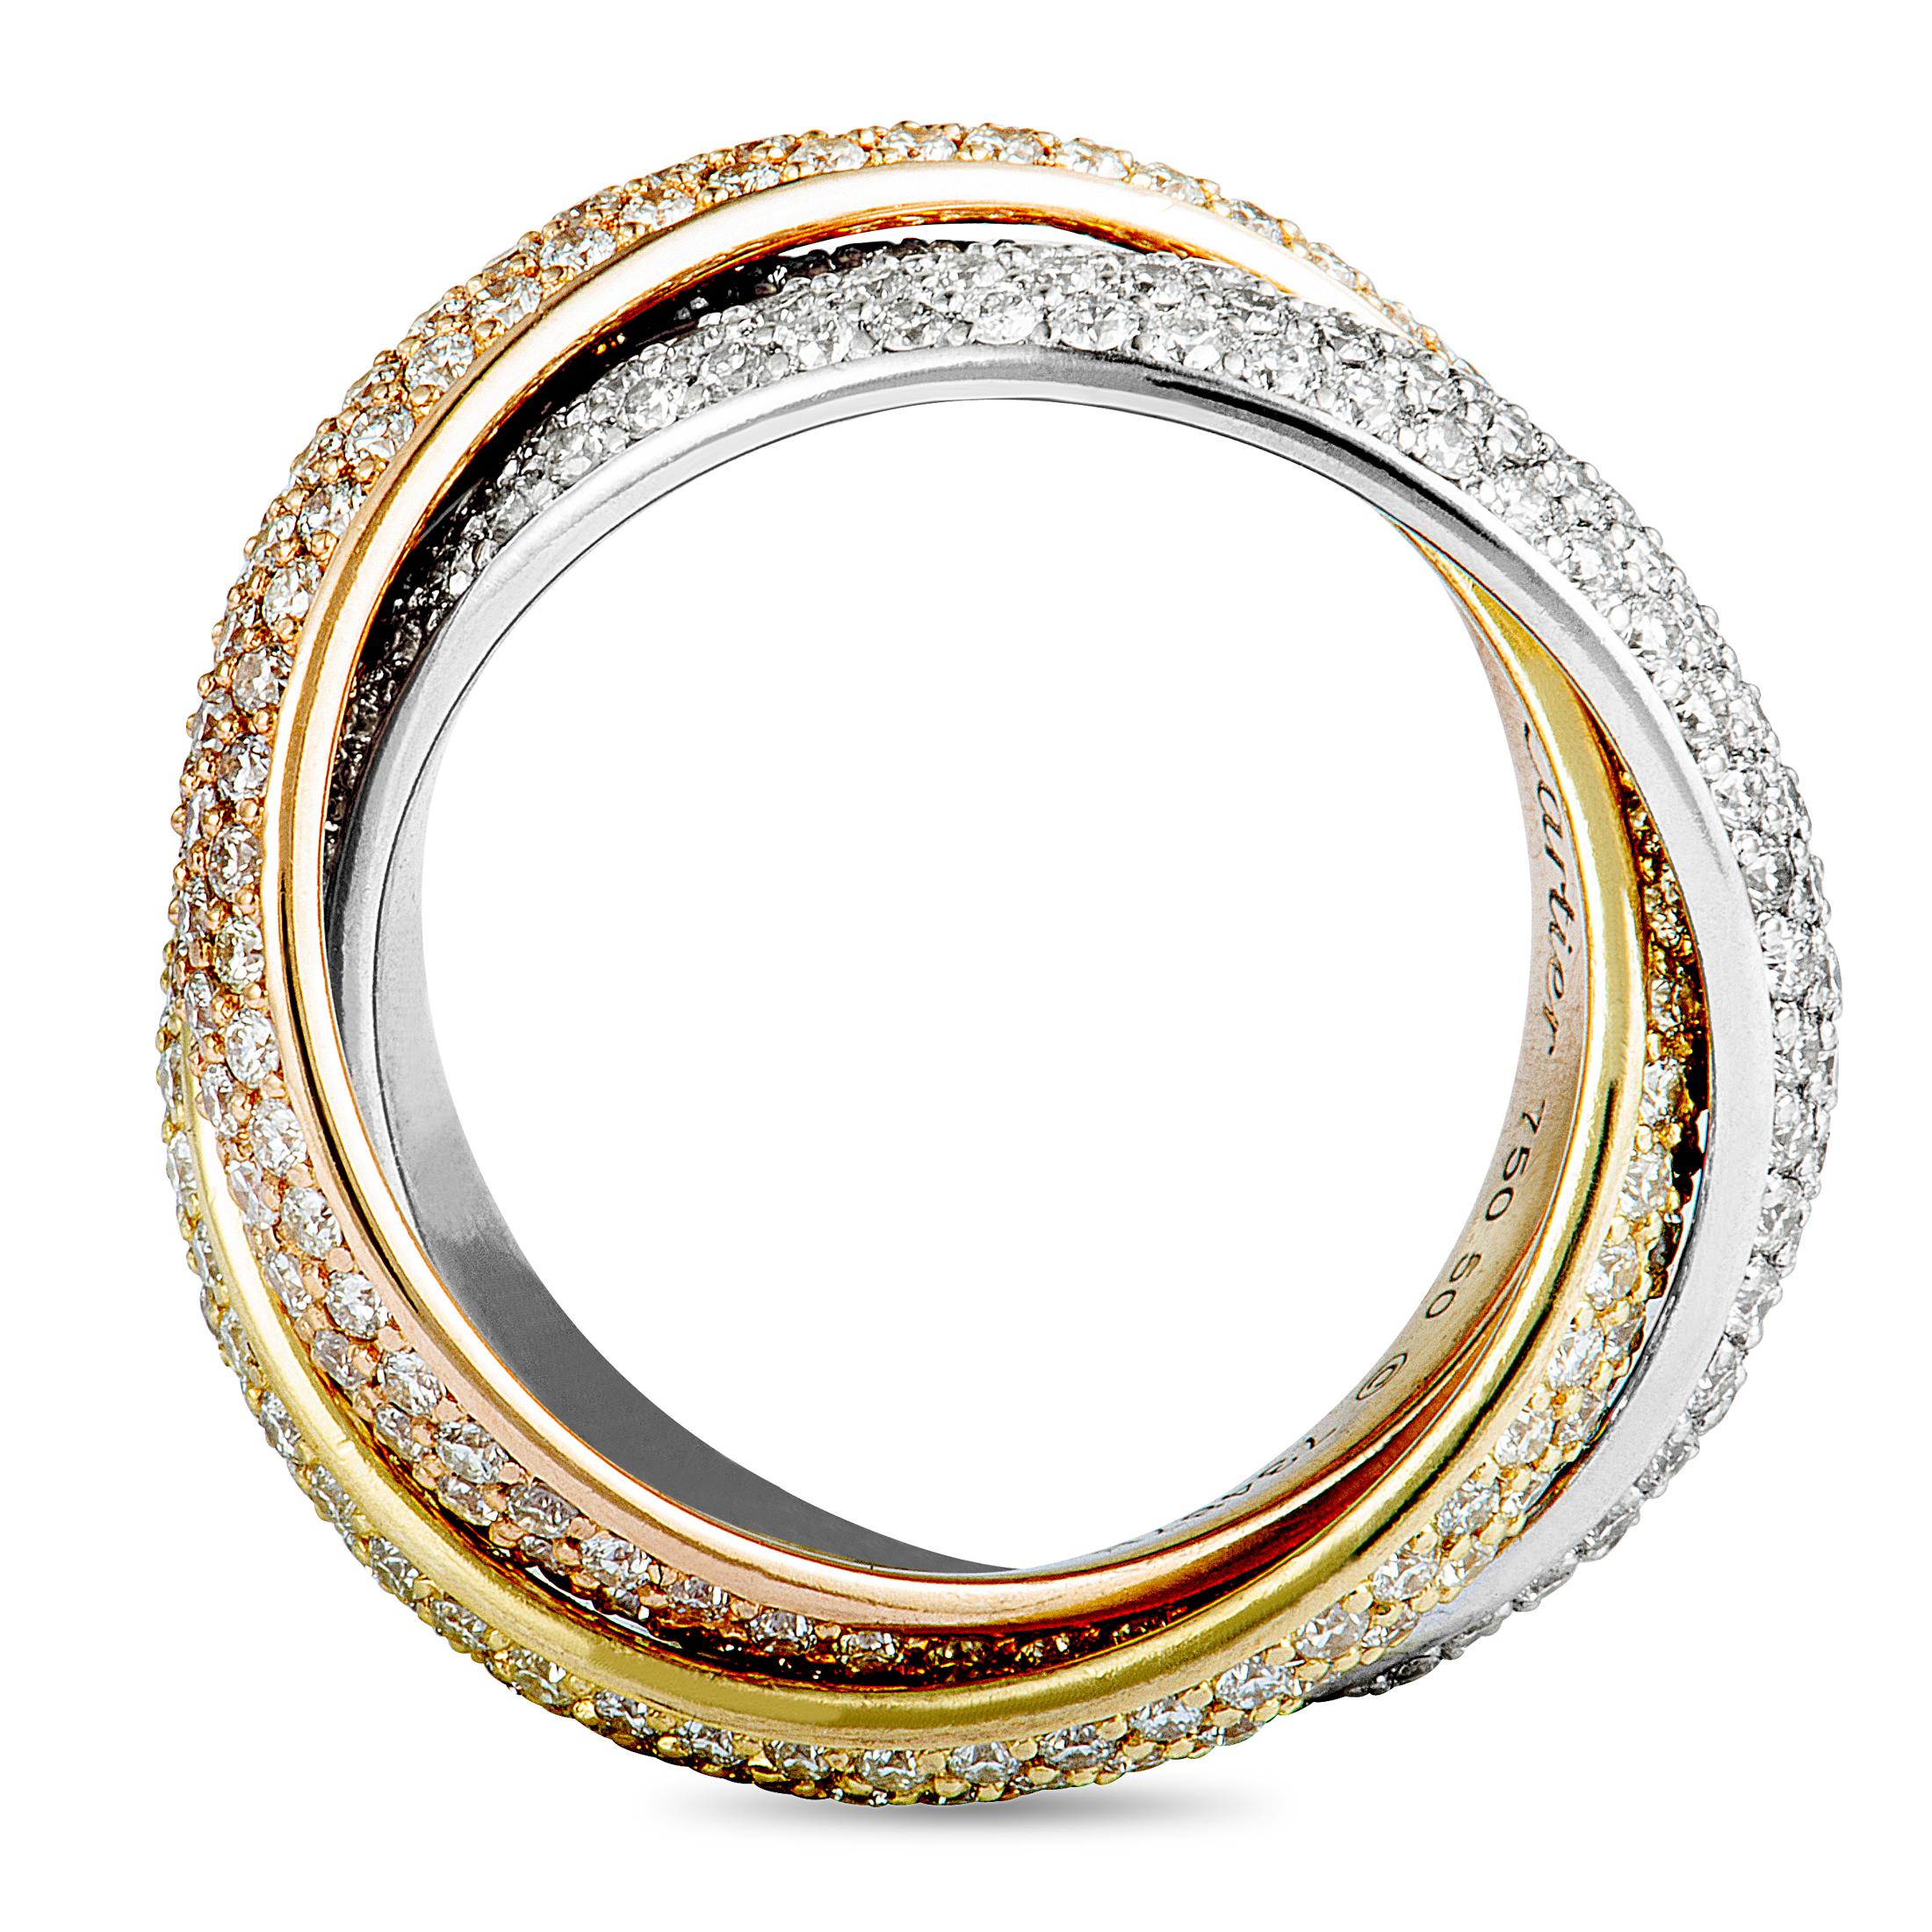 inside of a cartier ring